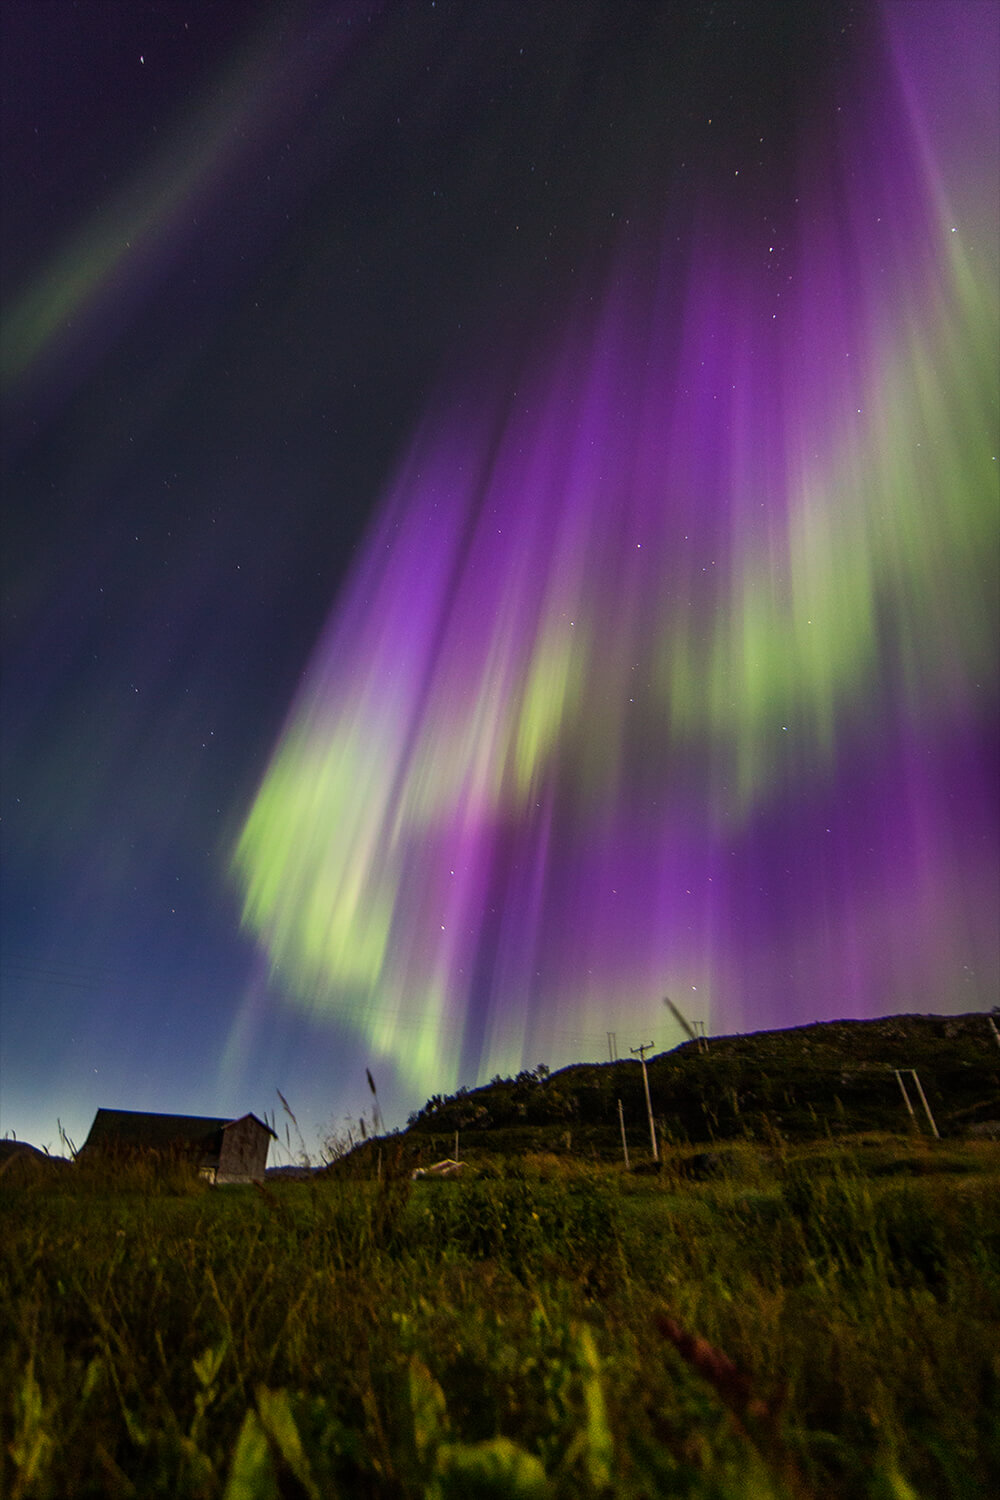 Photo of the Aurora Borealis over a cabin in Norway. Photo by Neil Bloem